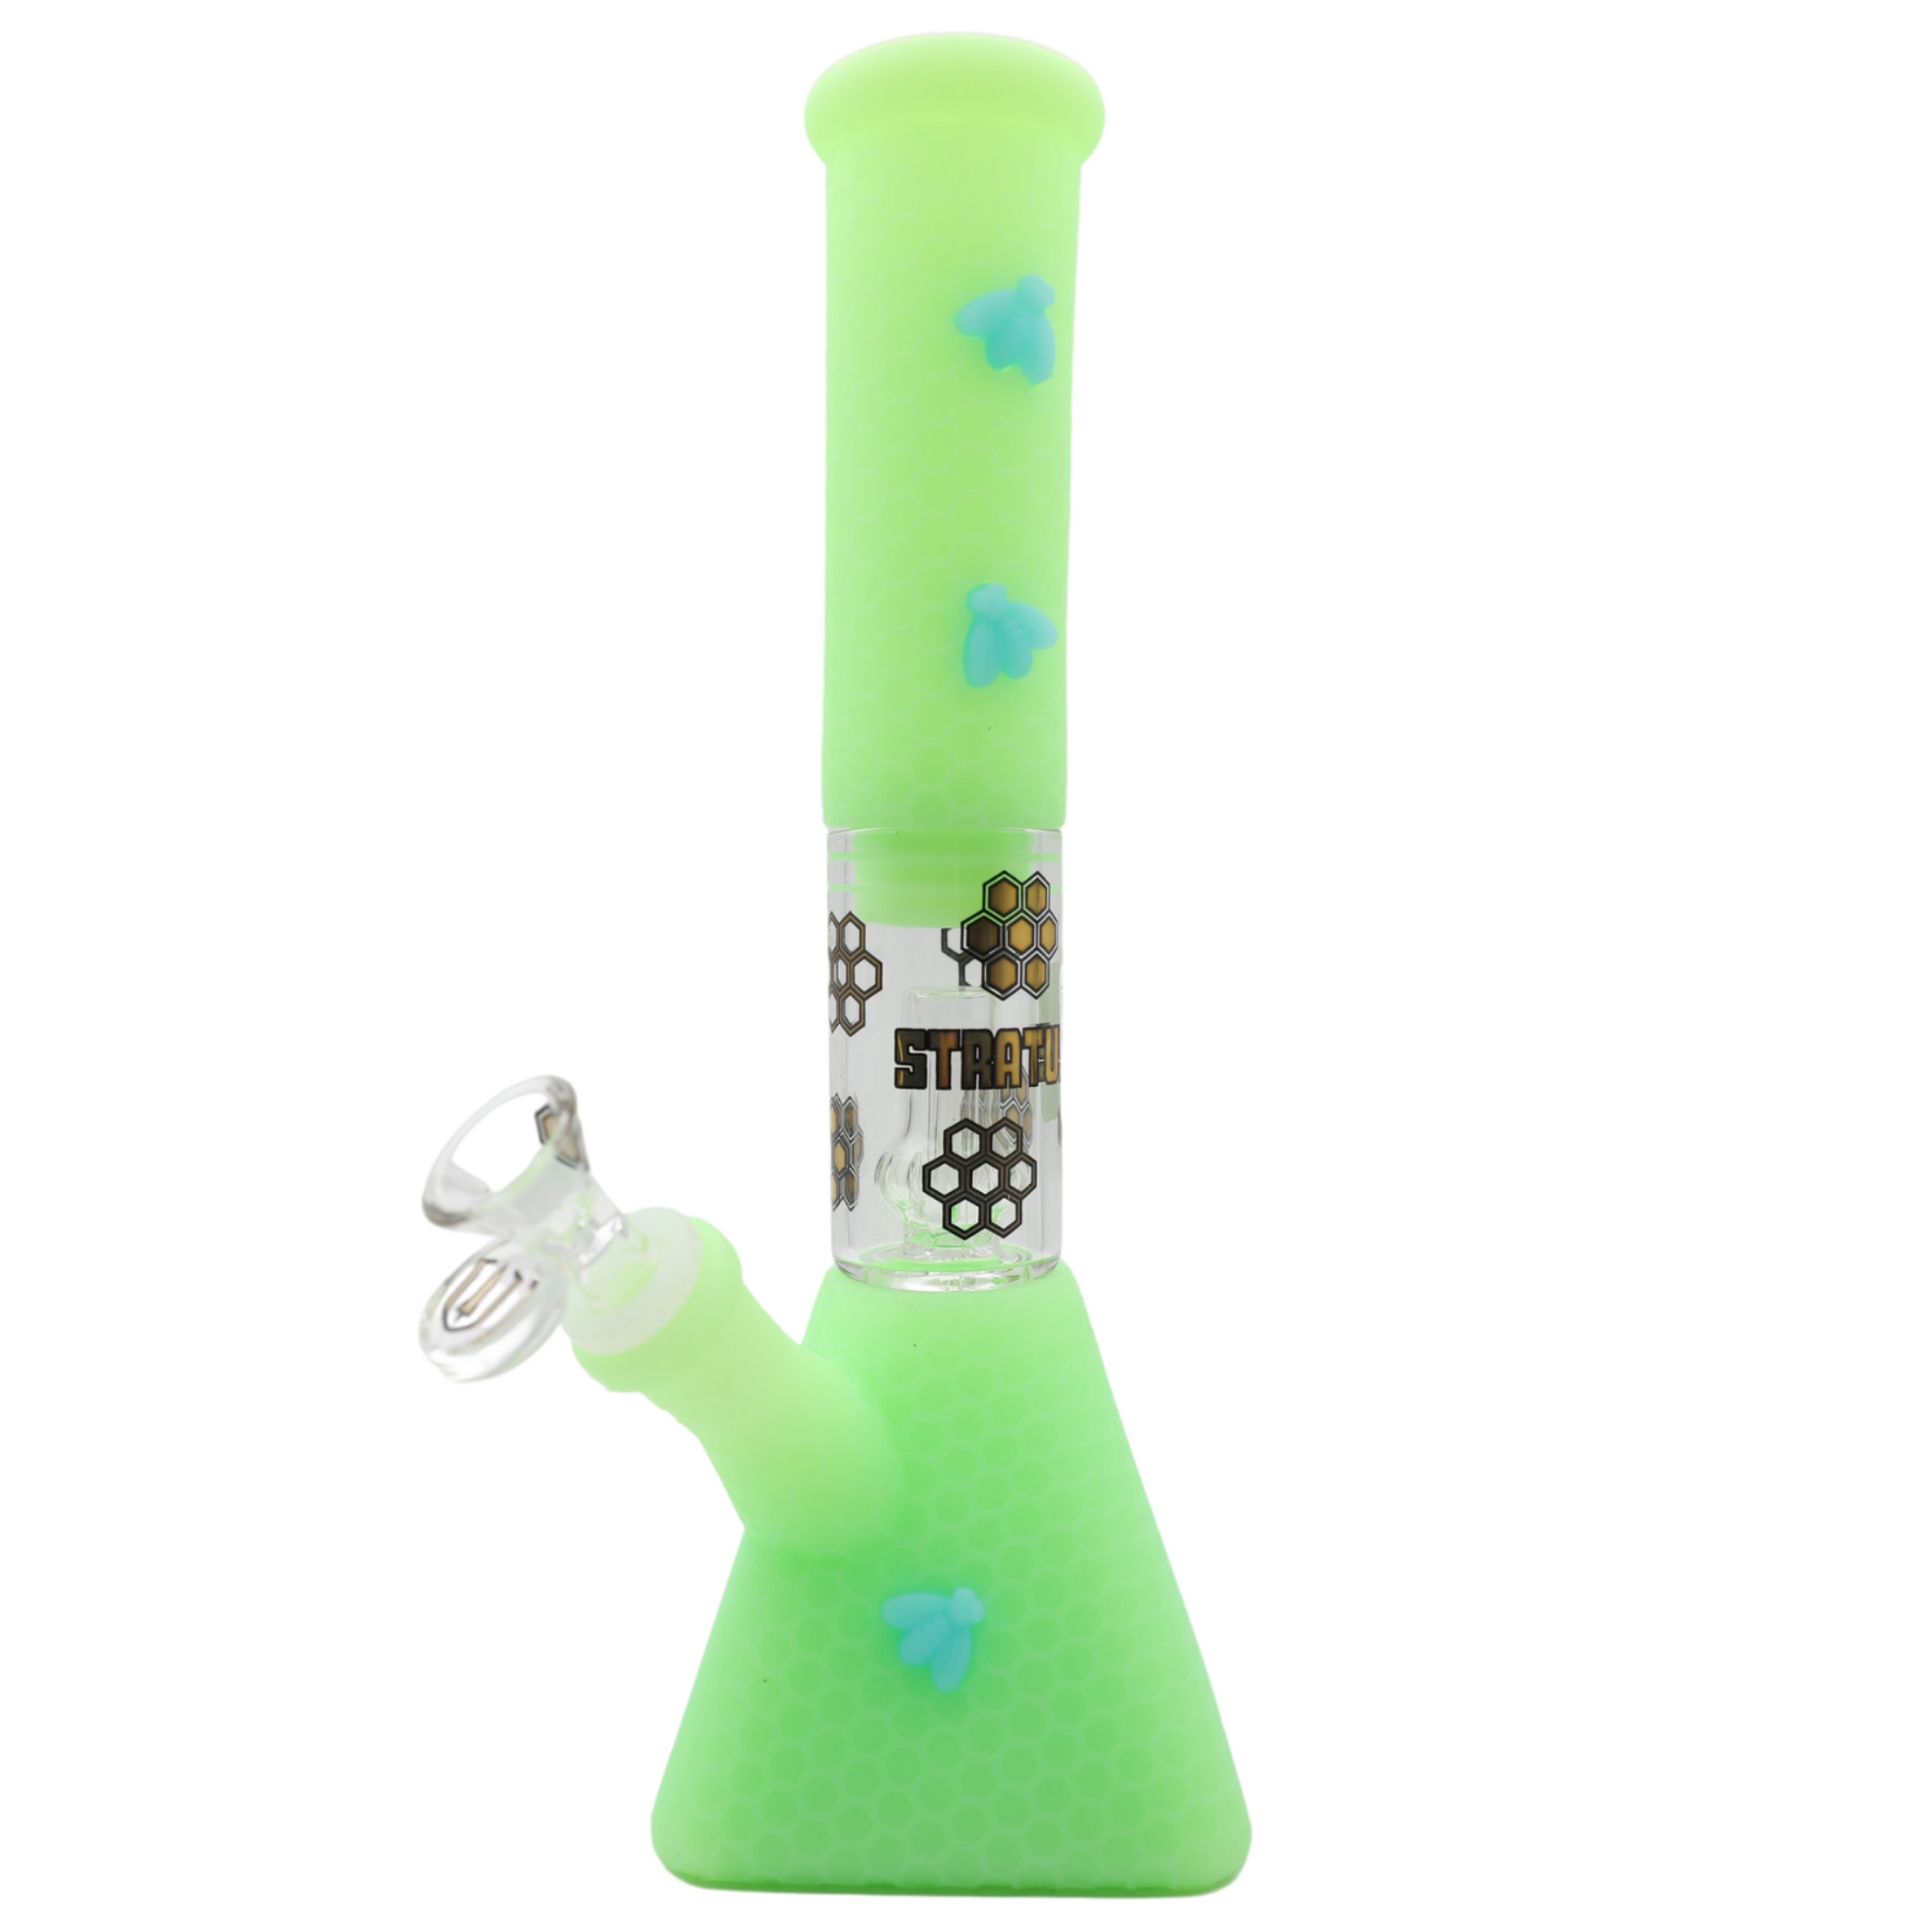 Seedless Slab Solo silicone dab mat - Many Clouds Smoke Shop